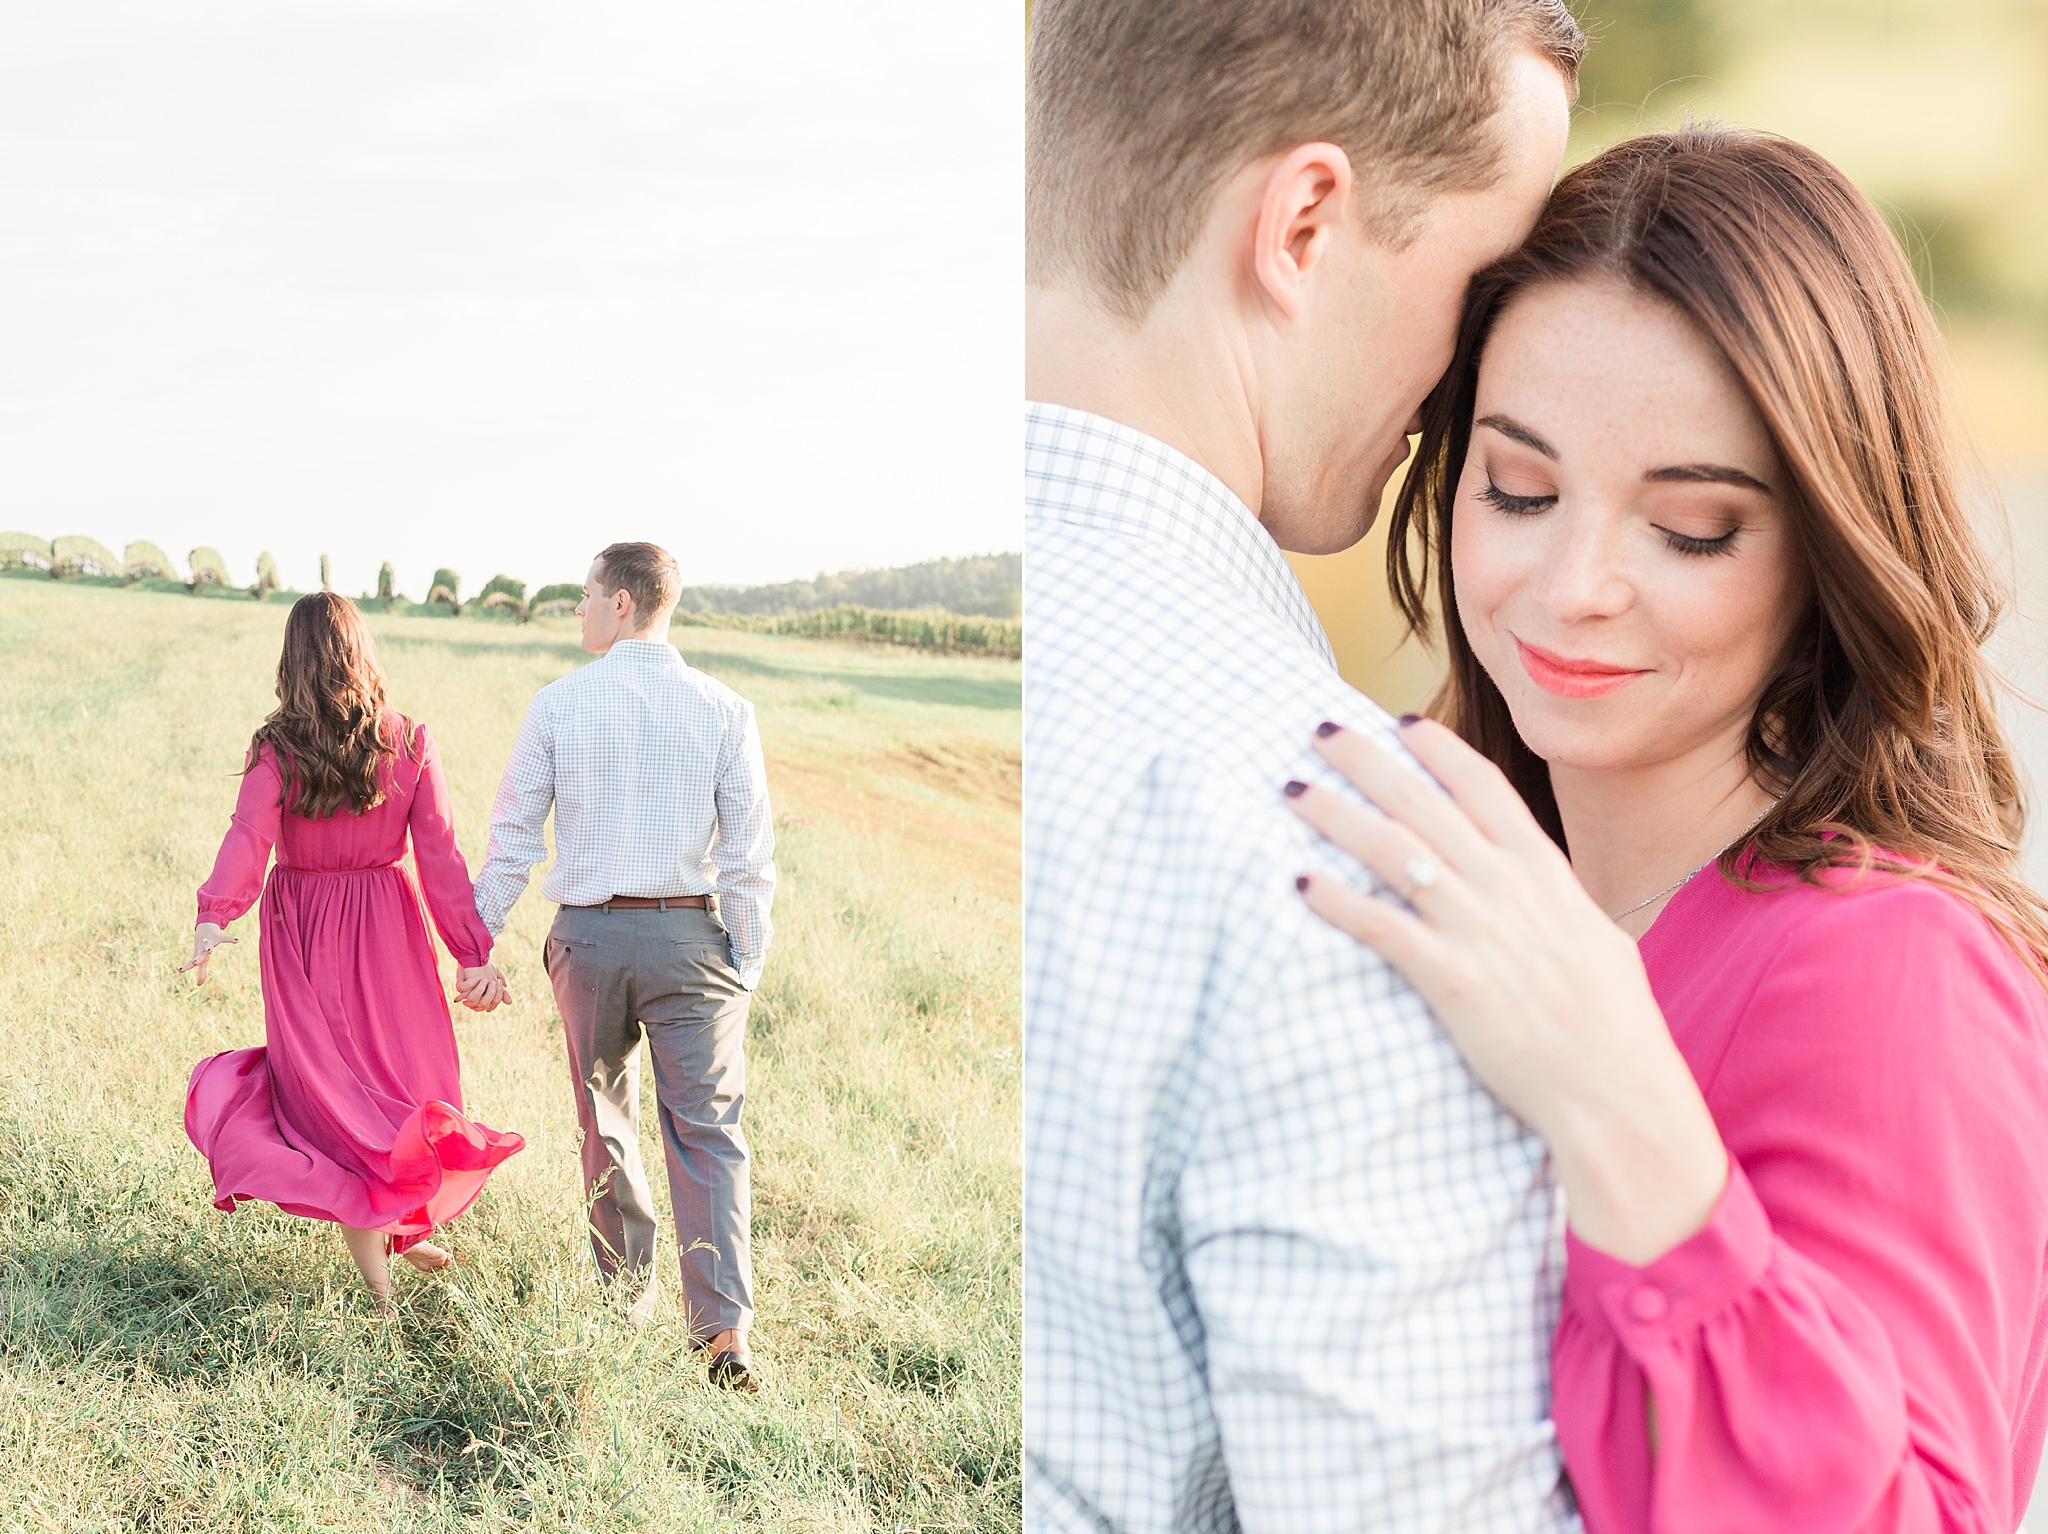 A romantic fall engagement photo session at Stone Tower Winery, a popular vineyard in Leesburg, VA.